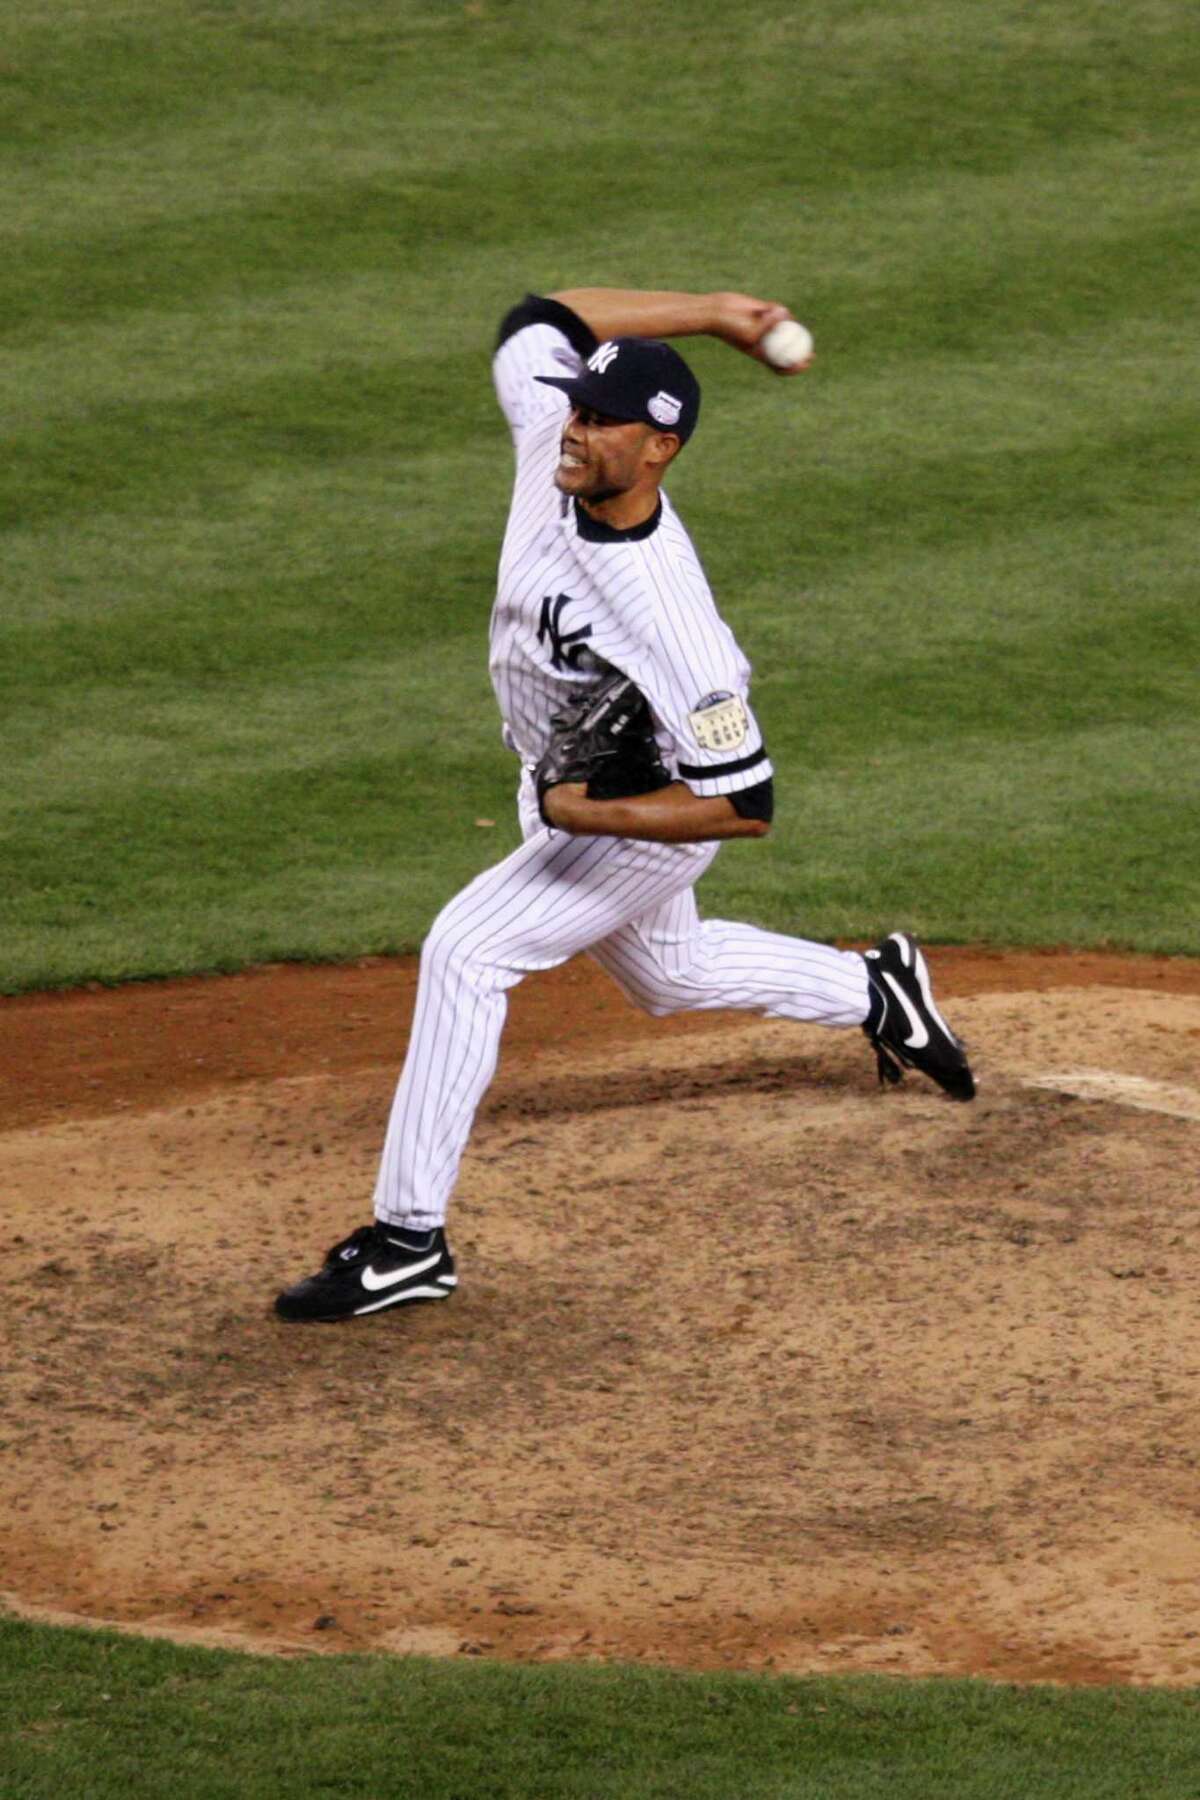 Mariano Rivera of the New York Yankees pitches in the ninth inning of the 79th Major League Baseball All-Star Game at Yankee Stadium in the Bronx on Tuesday, July 15, 2008.